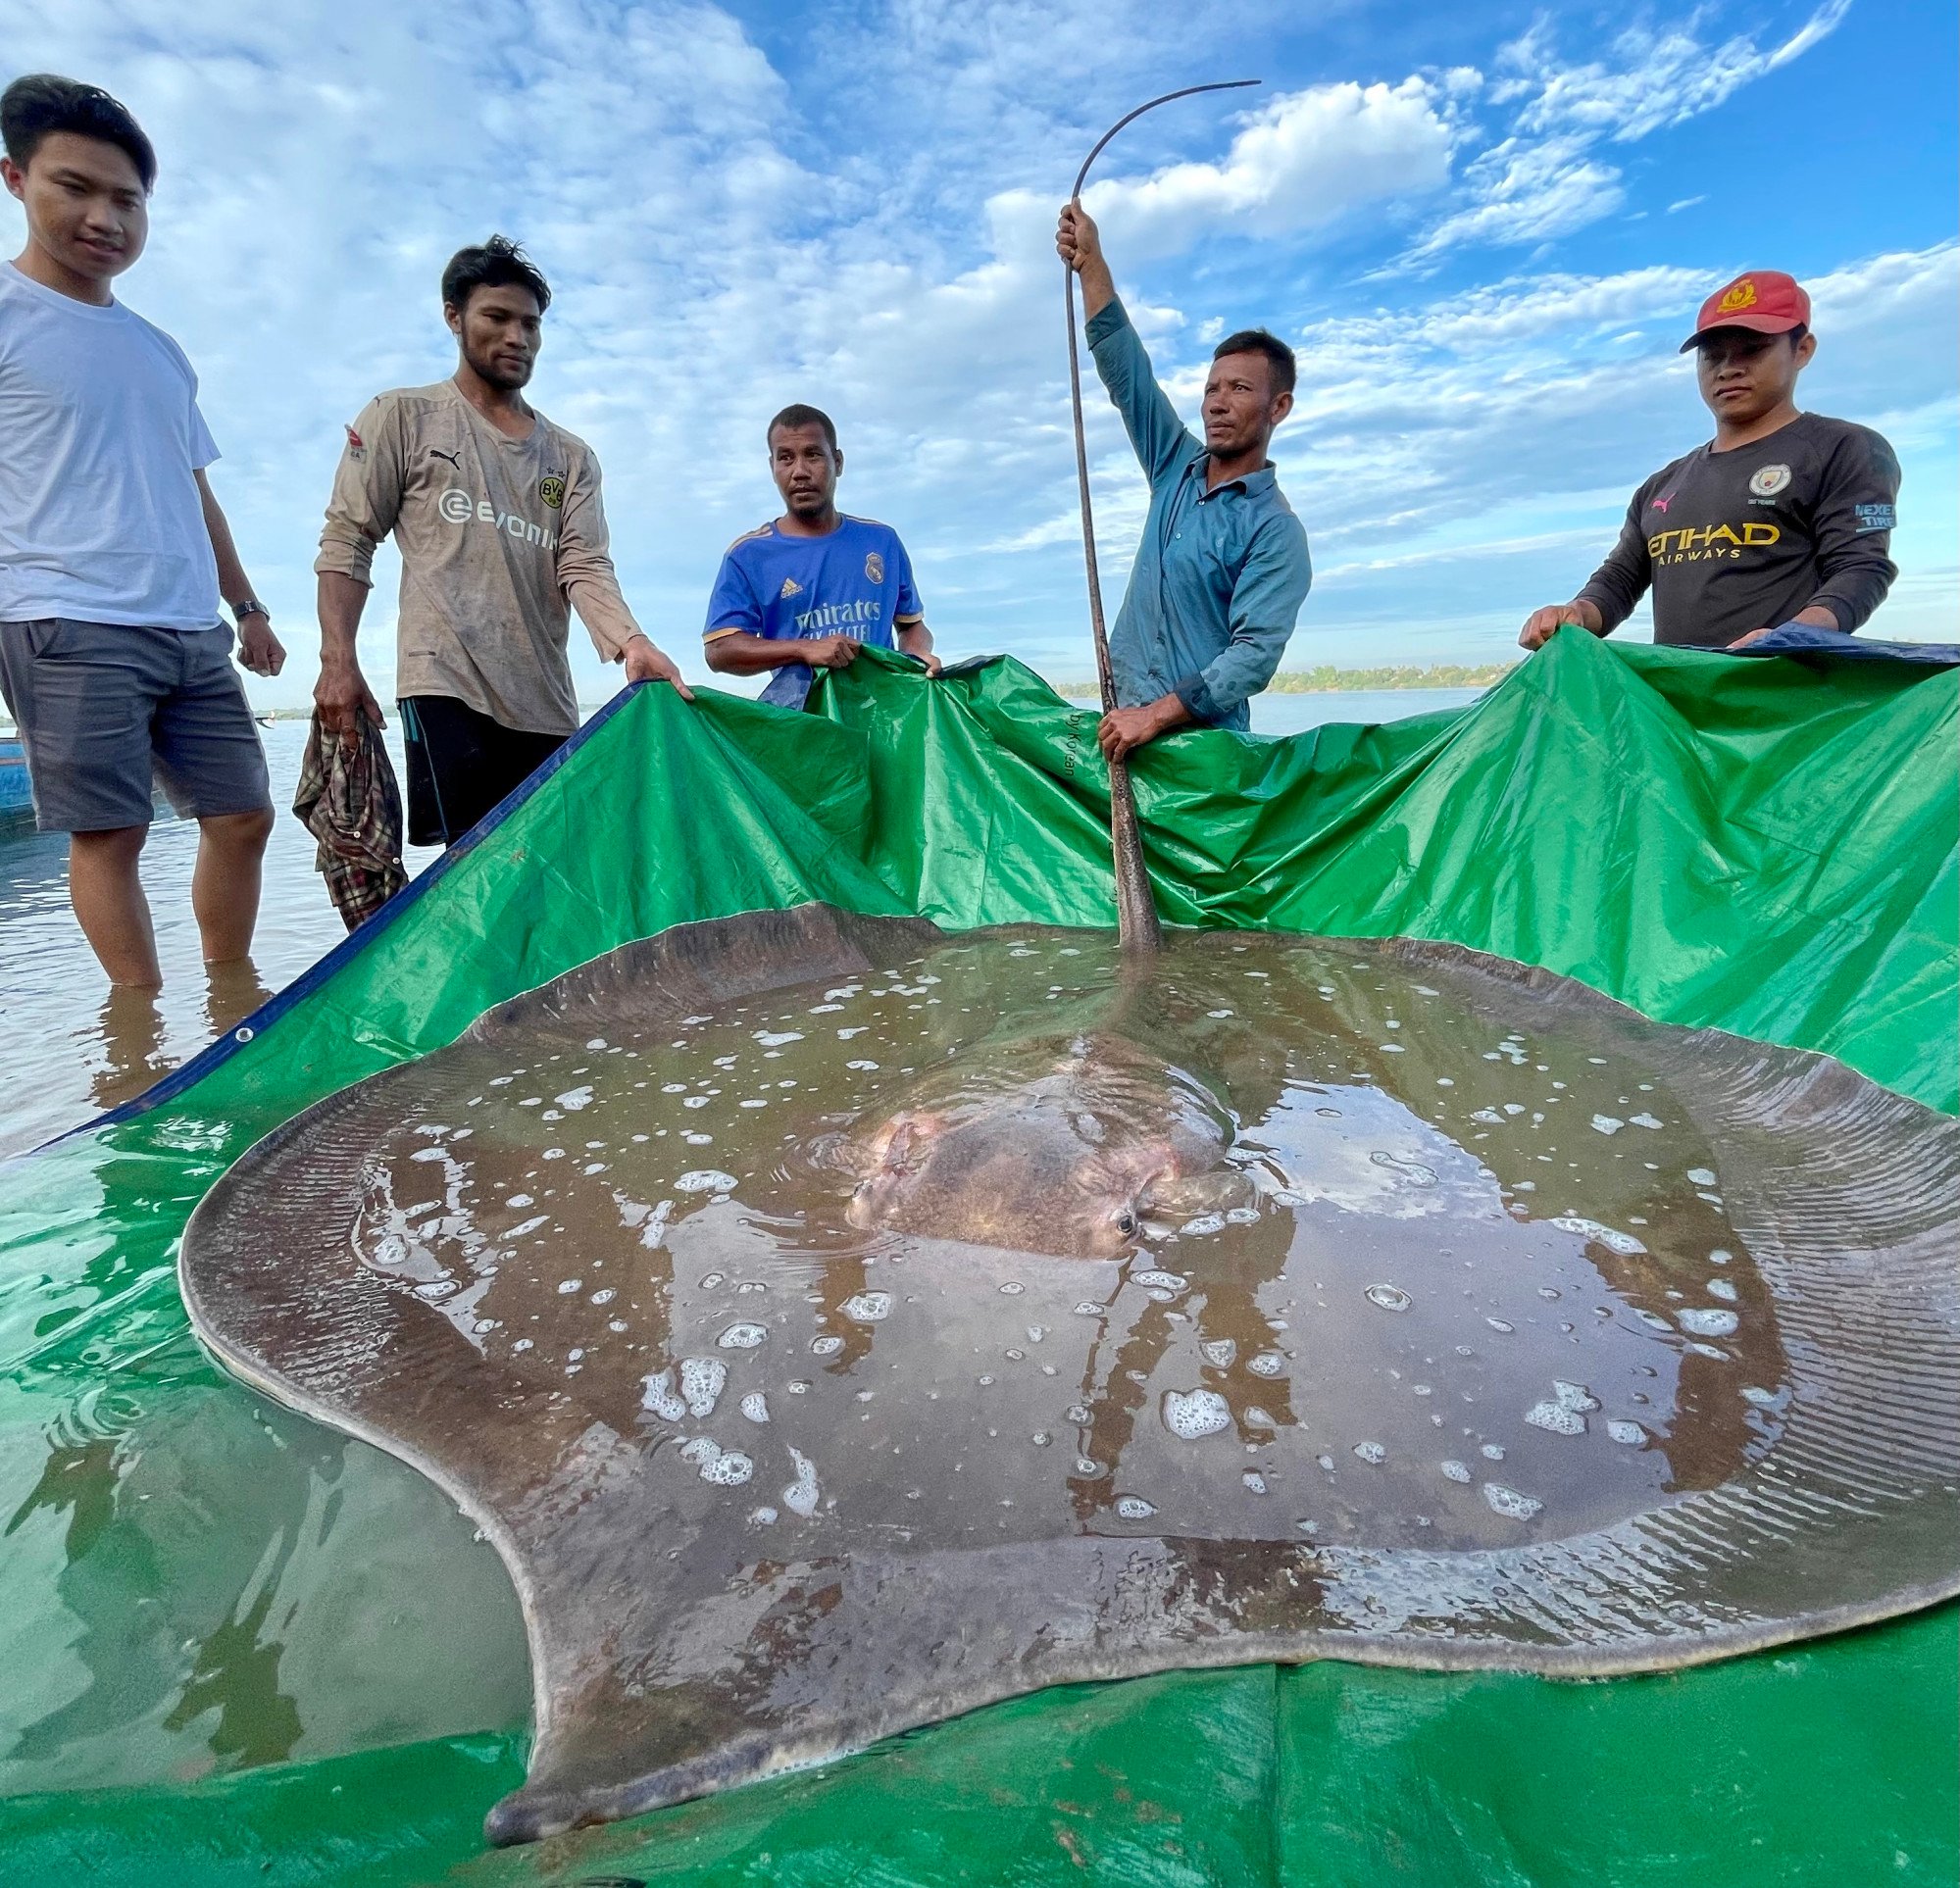 A 300kg giant stingray found in the Mekong in Cambodia. Photo: Handout